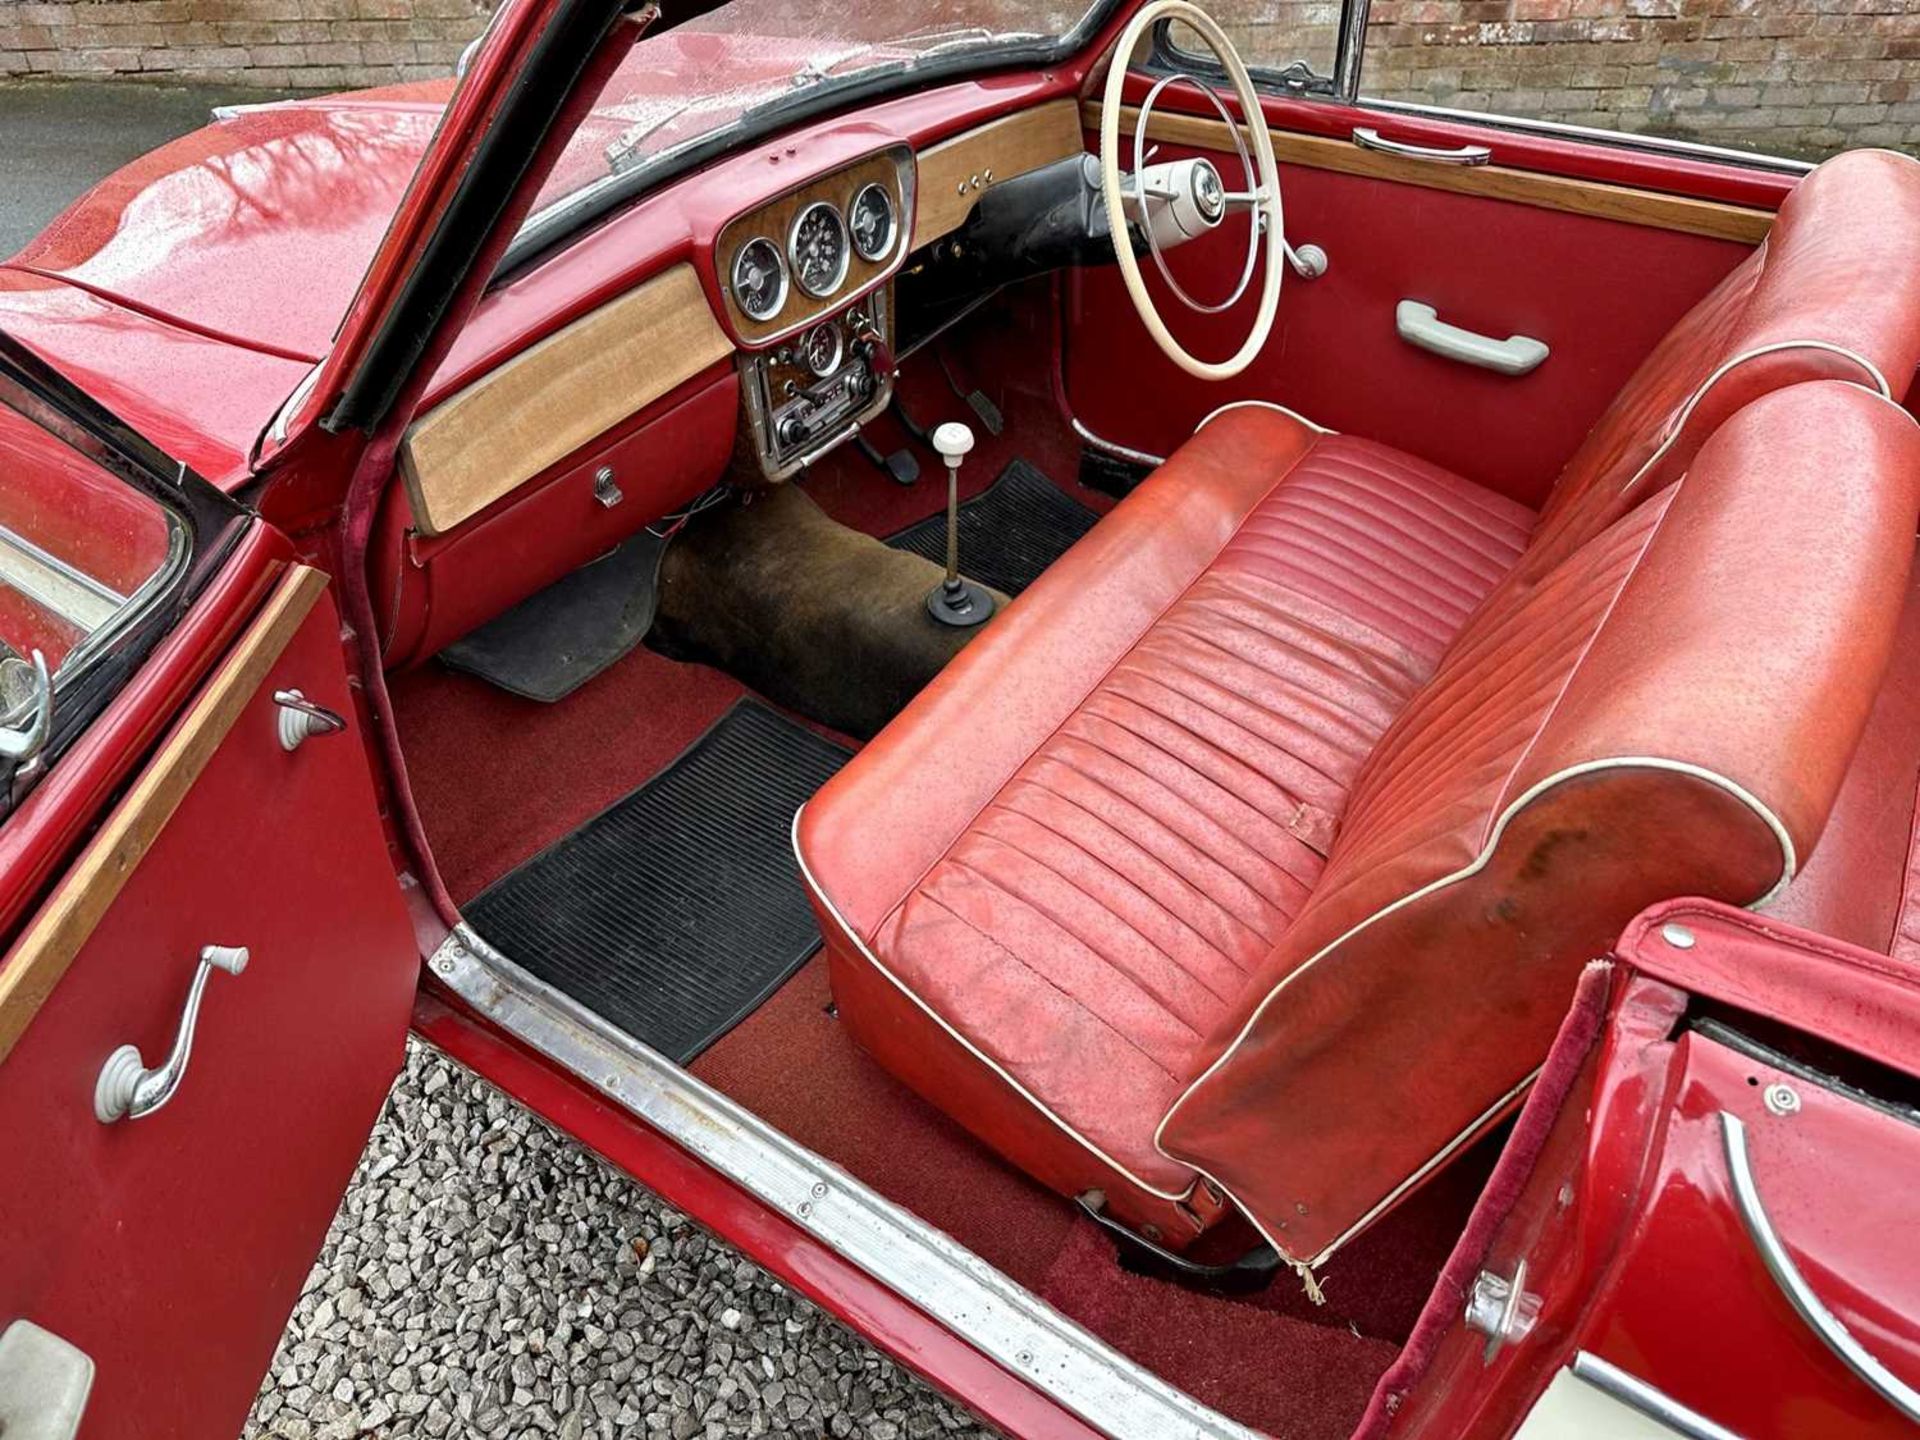 1961 Singer Gazelle Convertible Comes complete with overdrive, period radio and badge bar - Image 50 of 95